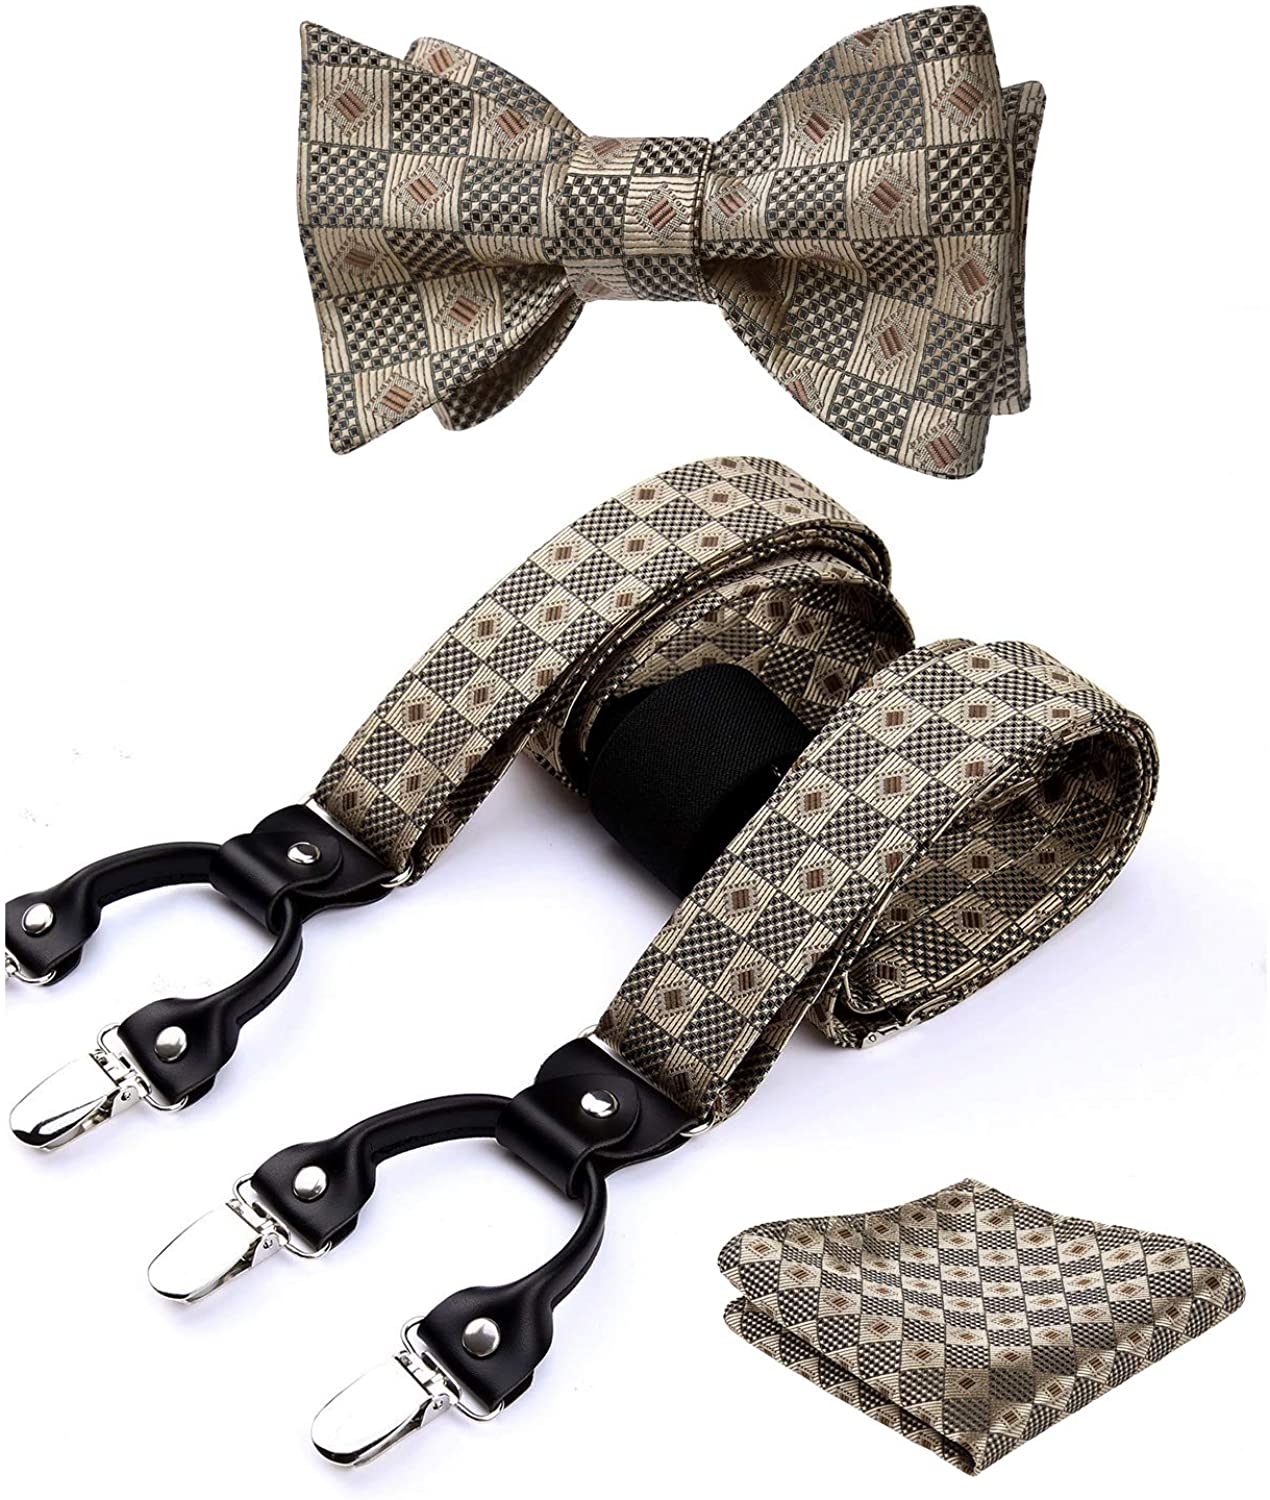 HISDERN Various Classic 6 Clips Suspenders & Self Bow Tie Pocket Square Set#S4 